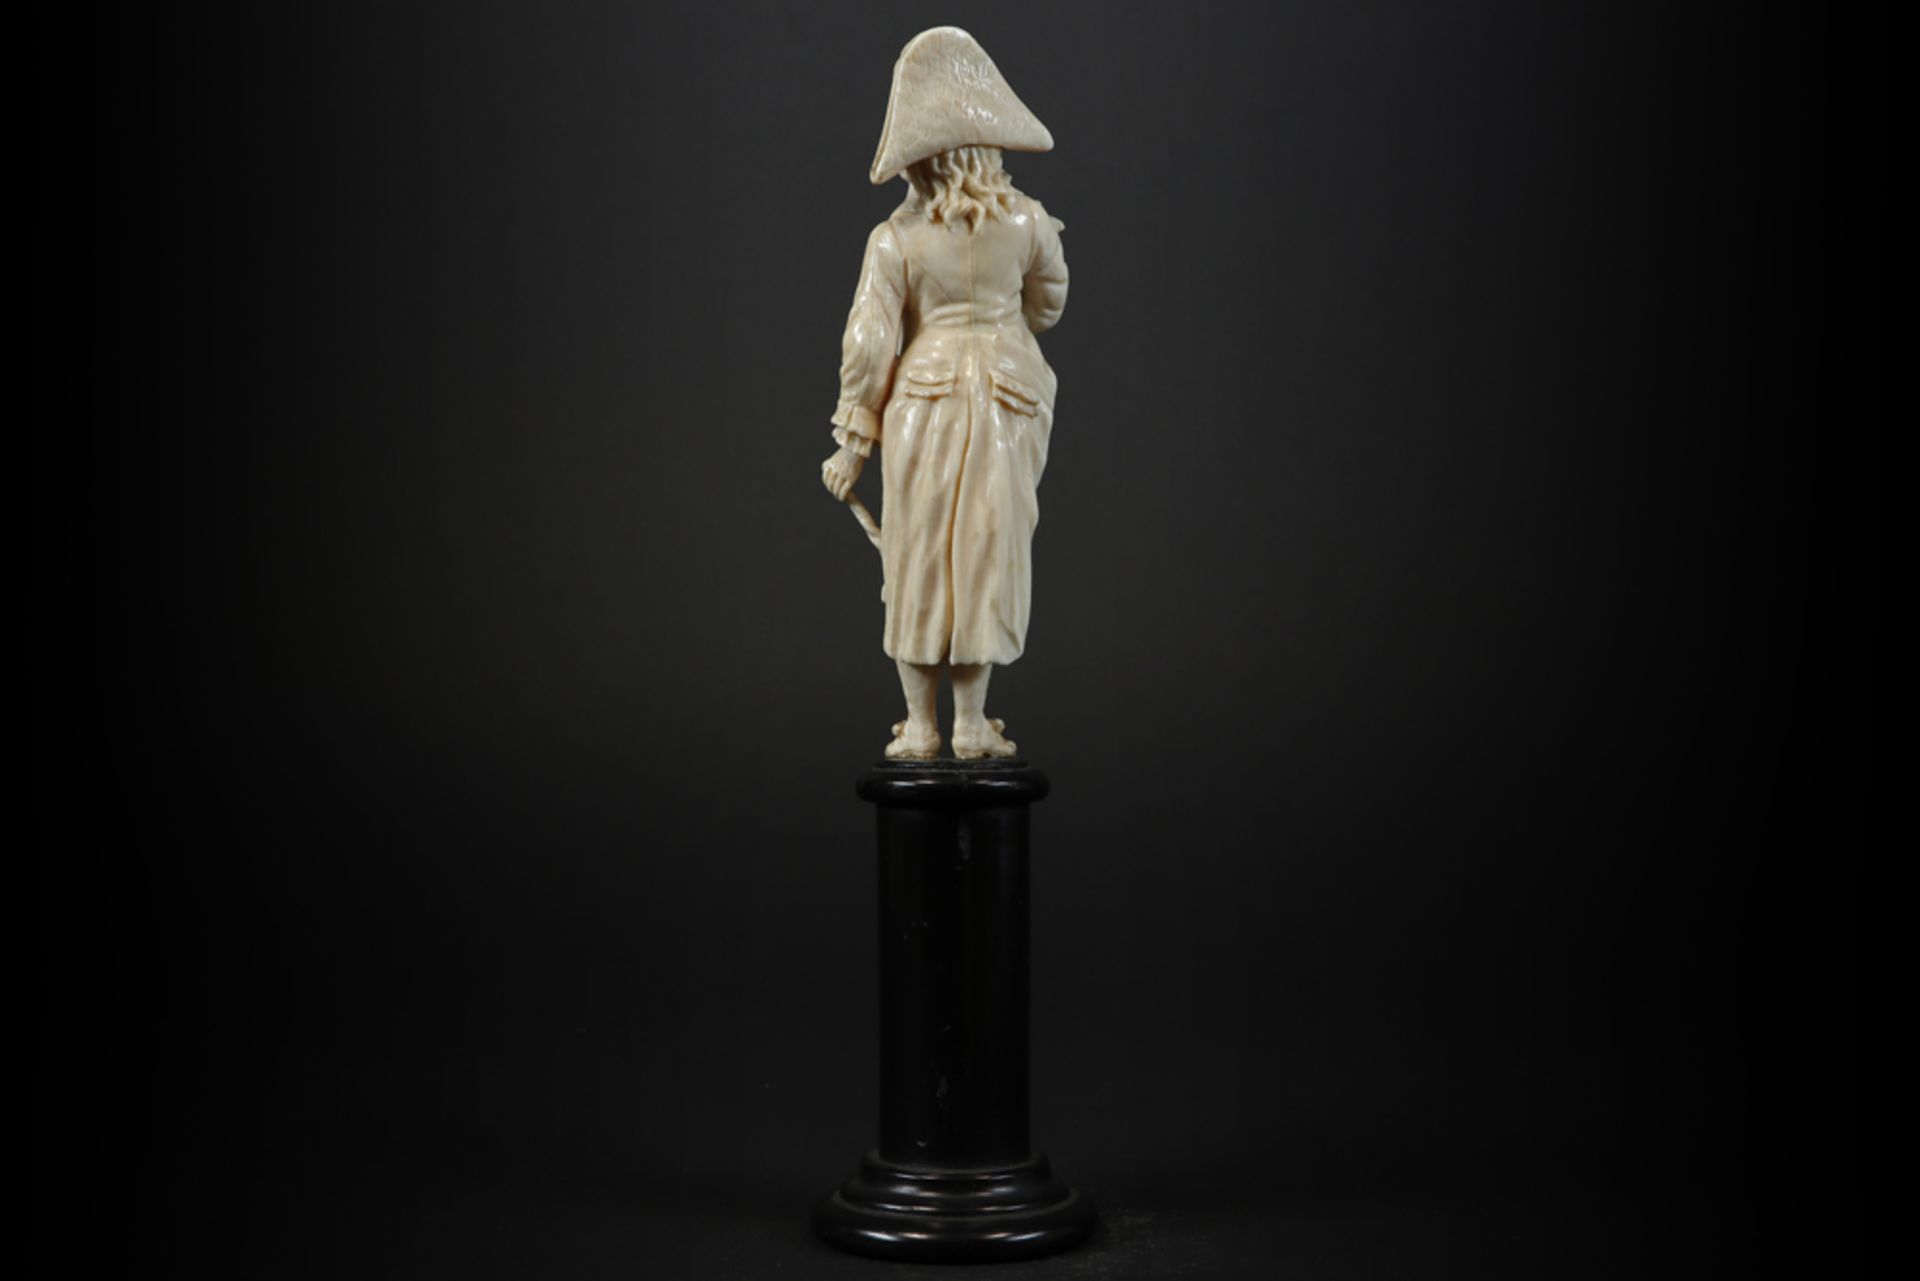 19th Cent. French sculpture in ivory, probably made in Dieppe - with European CITES certificate || - Image 4 of 5